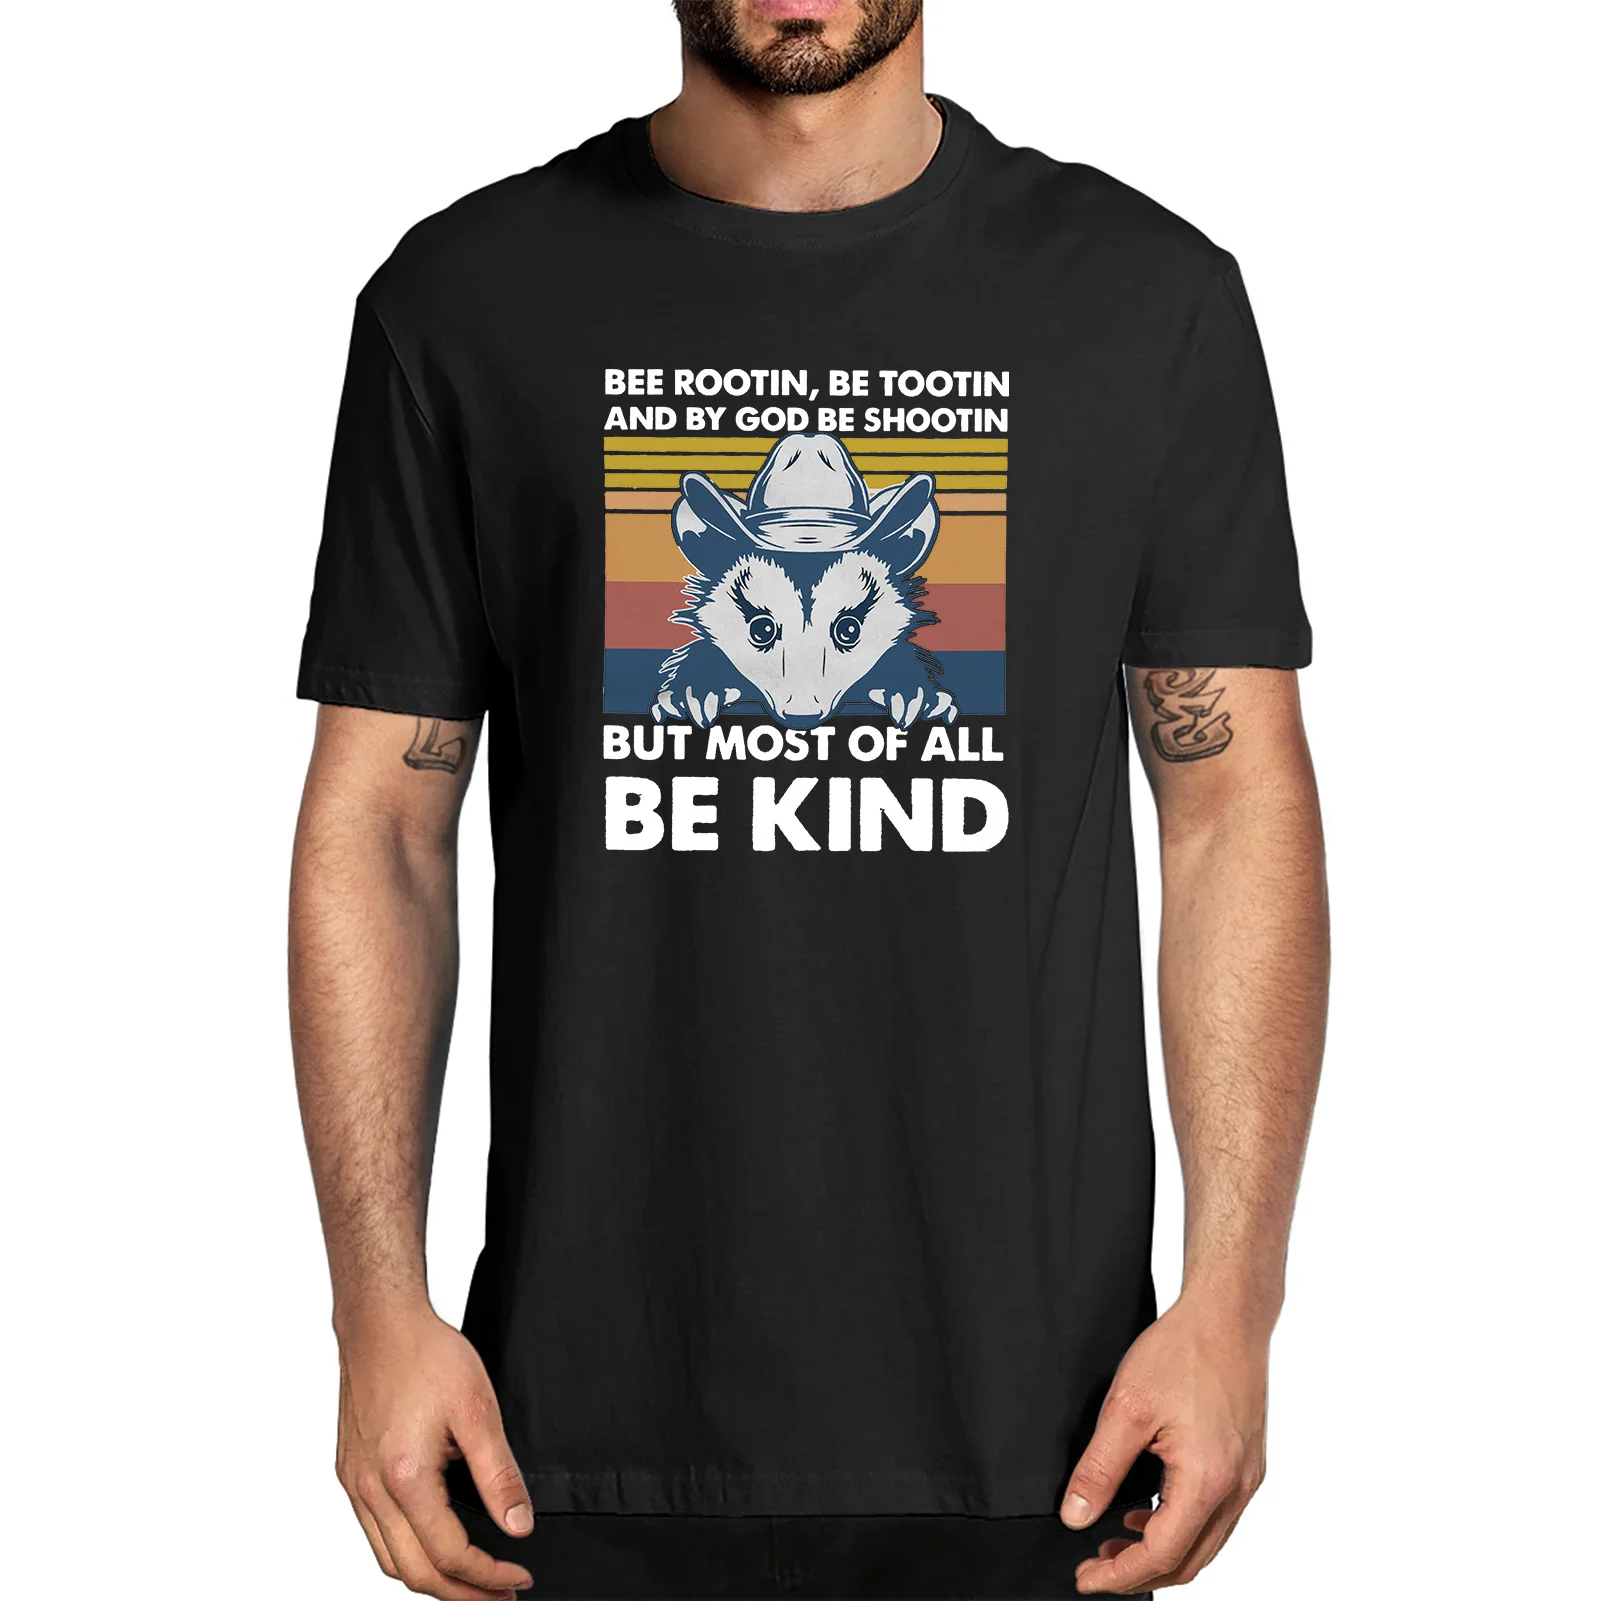 

Opossum Bee Rootin Be Tootin And By God Be Shootin But Most Of All Be Kind Inspired Funny Summer Men's 100% Cotton T-Shirt Tee